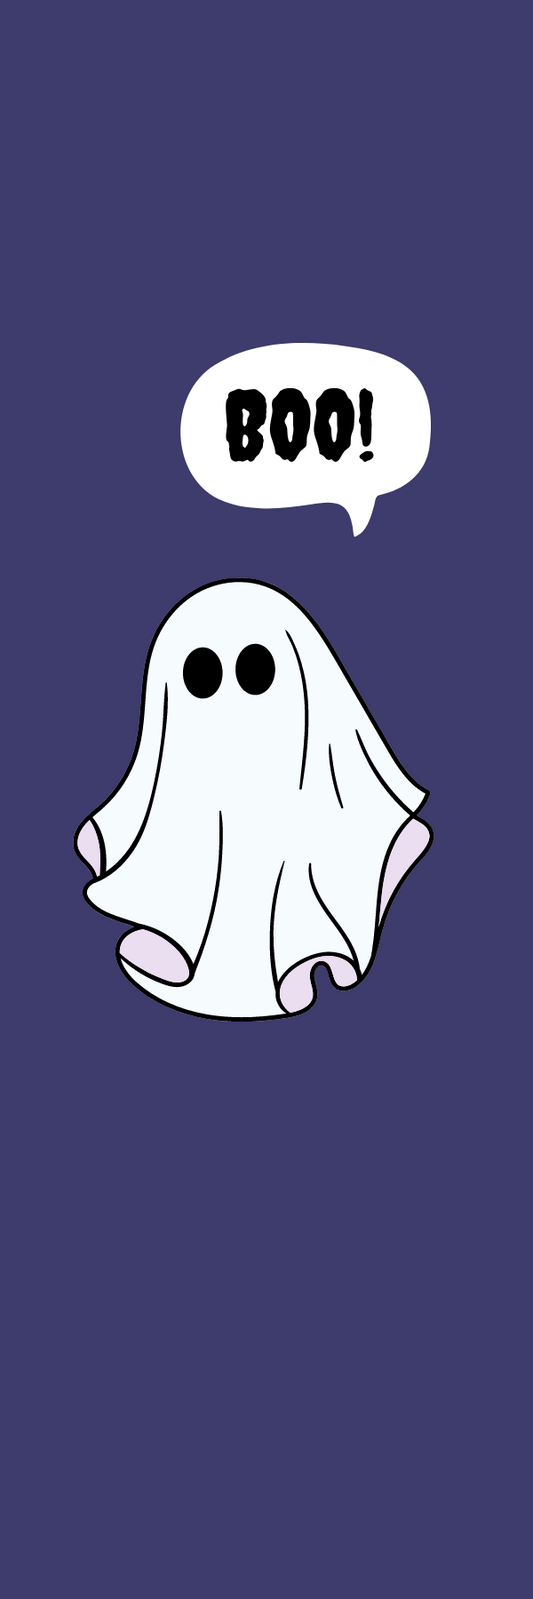 Our Little Ghost Friend